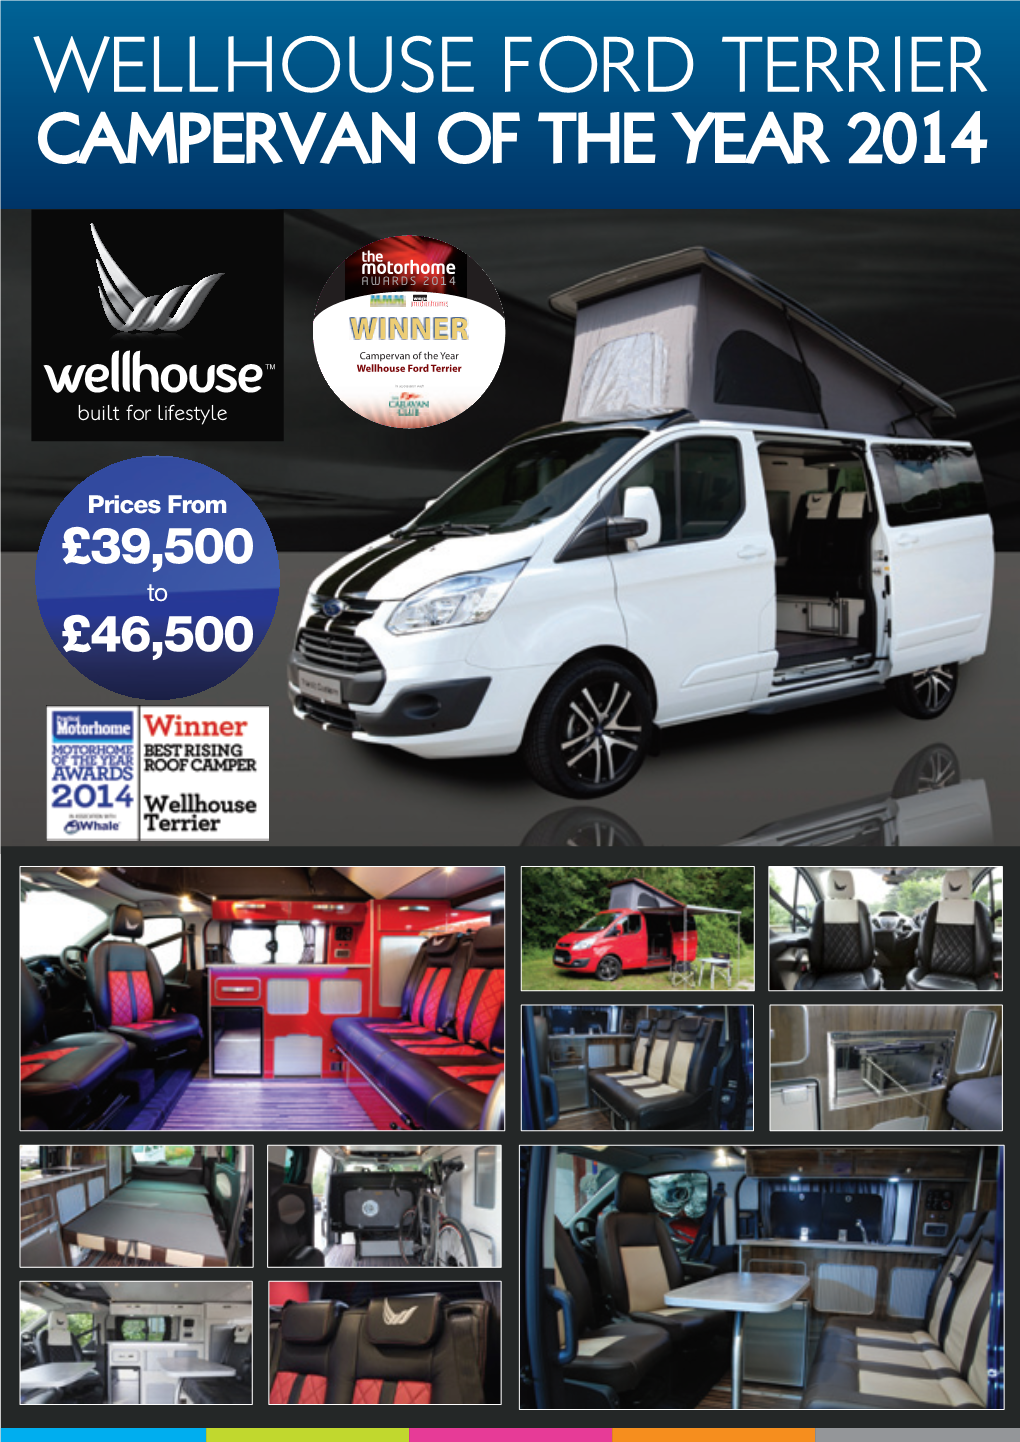 Wellhouse Ford Terrier CAMPERVAN of the YEAR 2014